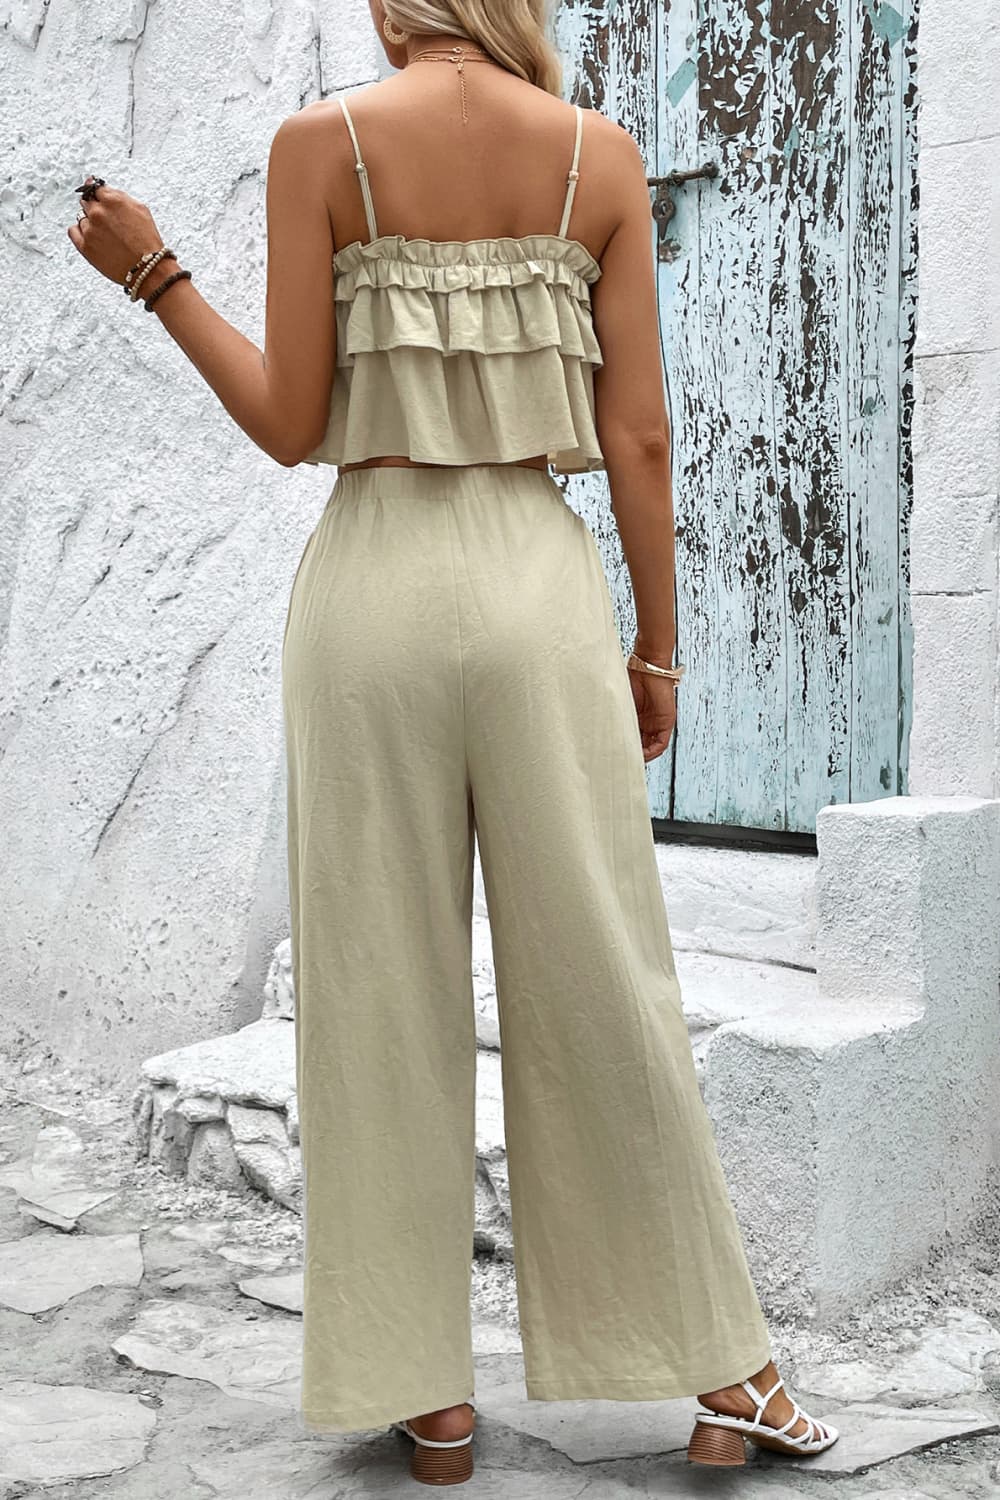 Frill Trim Cami and Wide Leg Pants Set The Stout Steer